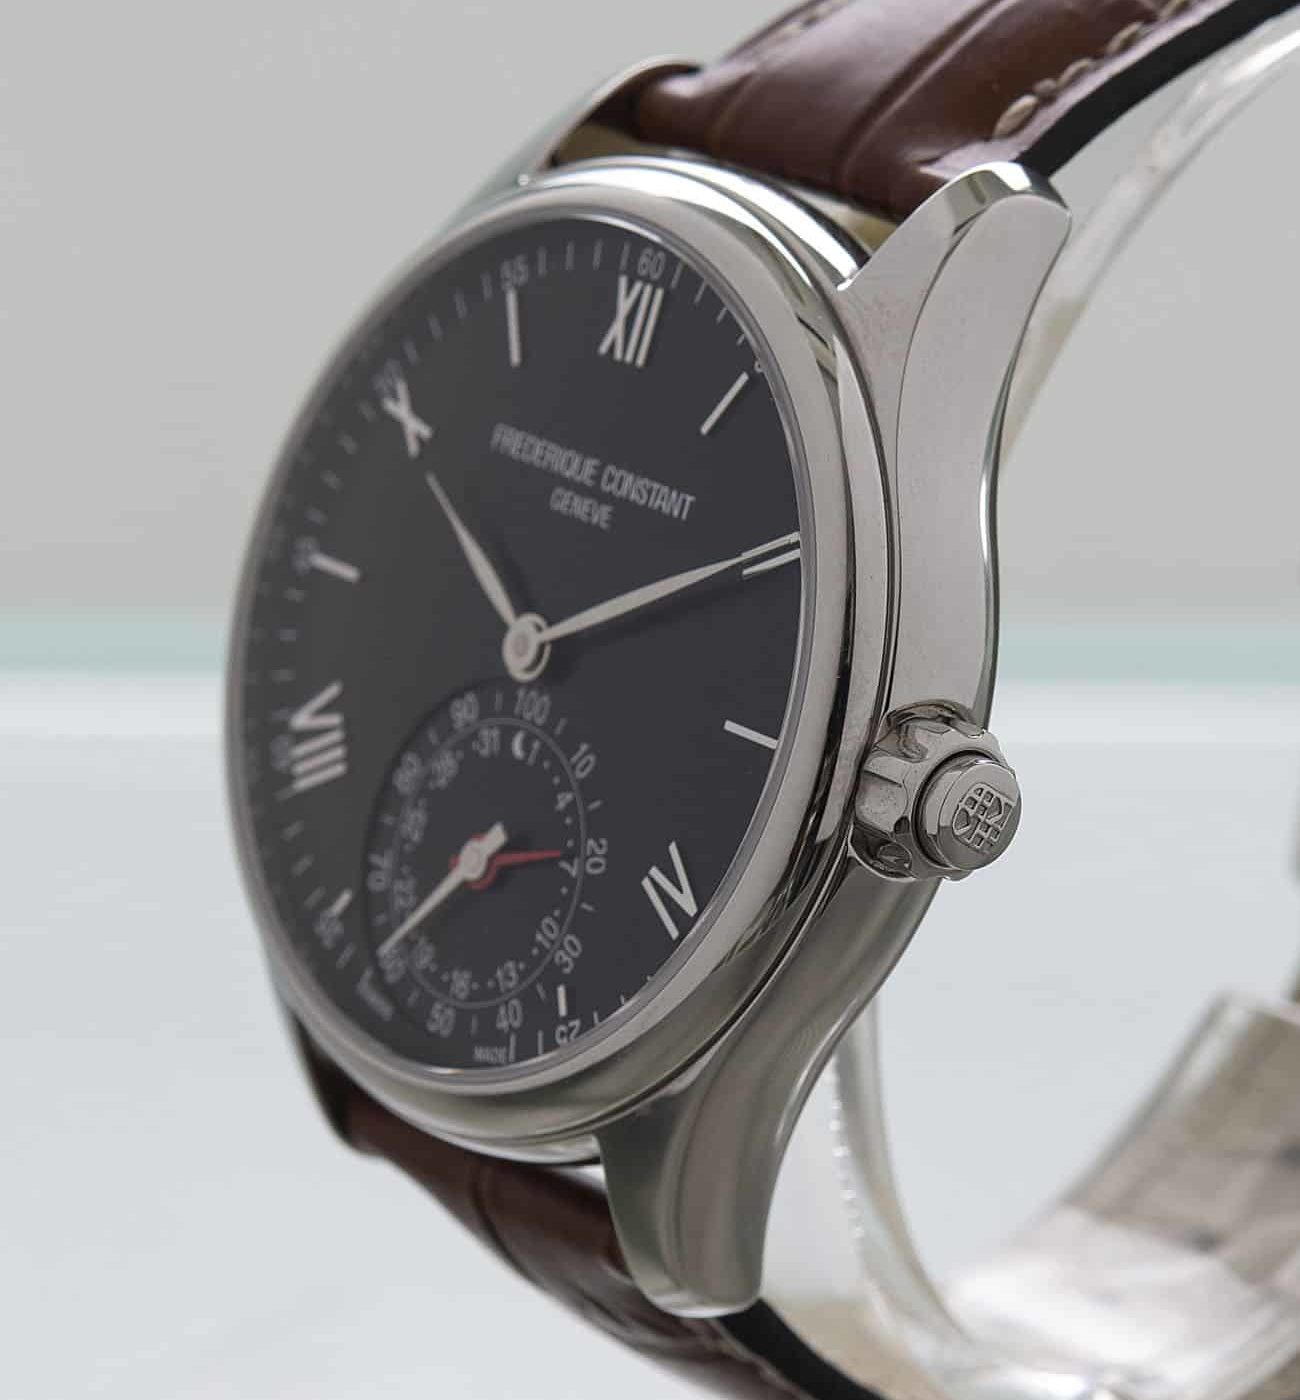 Frederique Constant Horological Smartwatch tracking Sleep Date FC-285B5B6